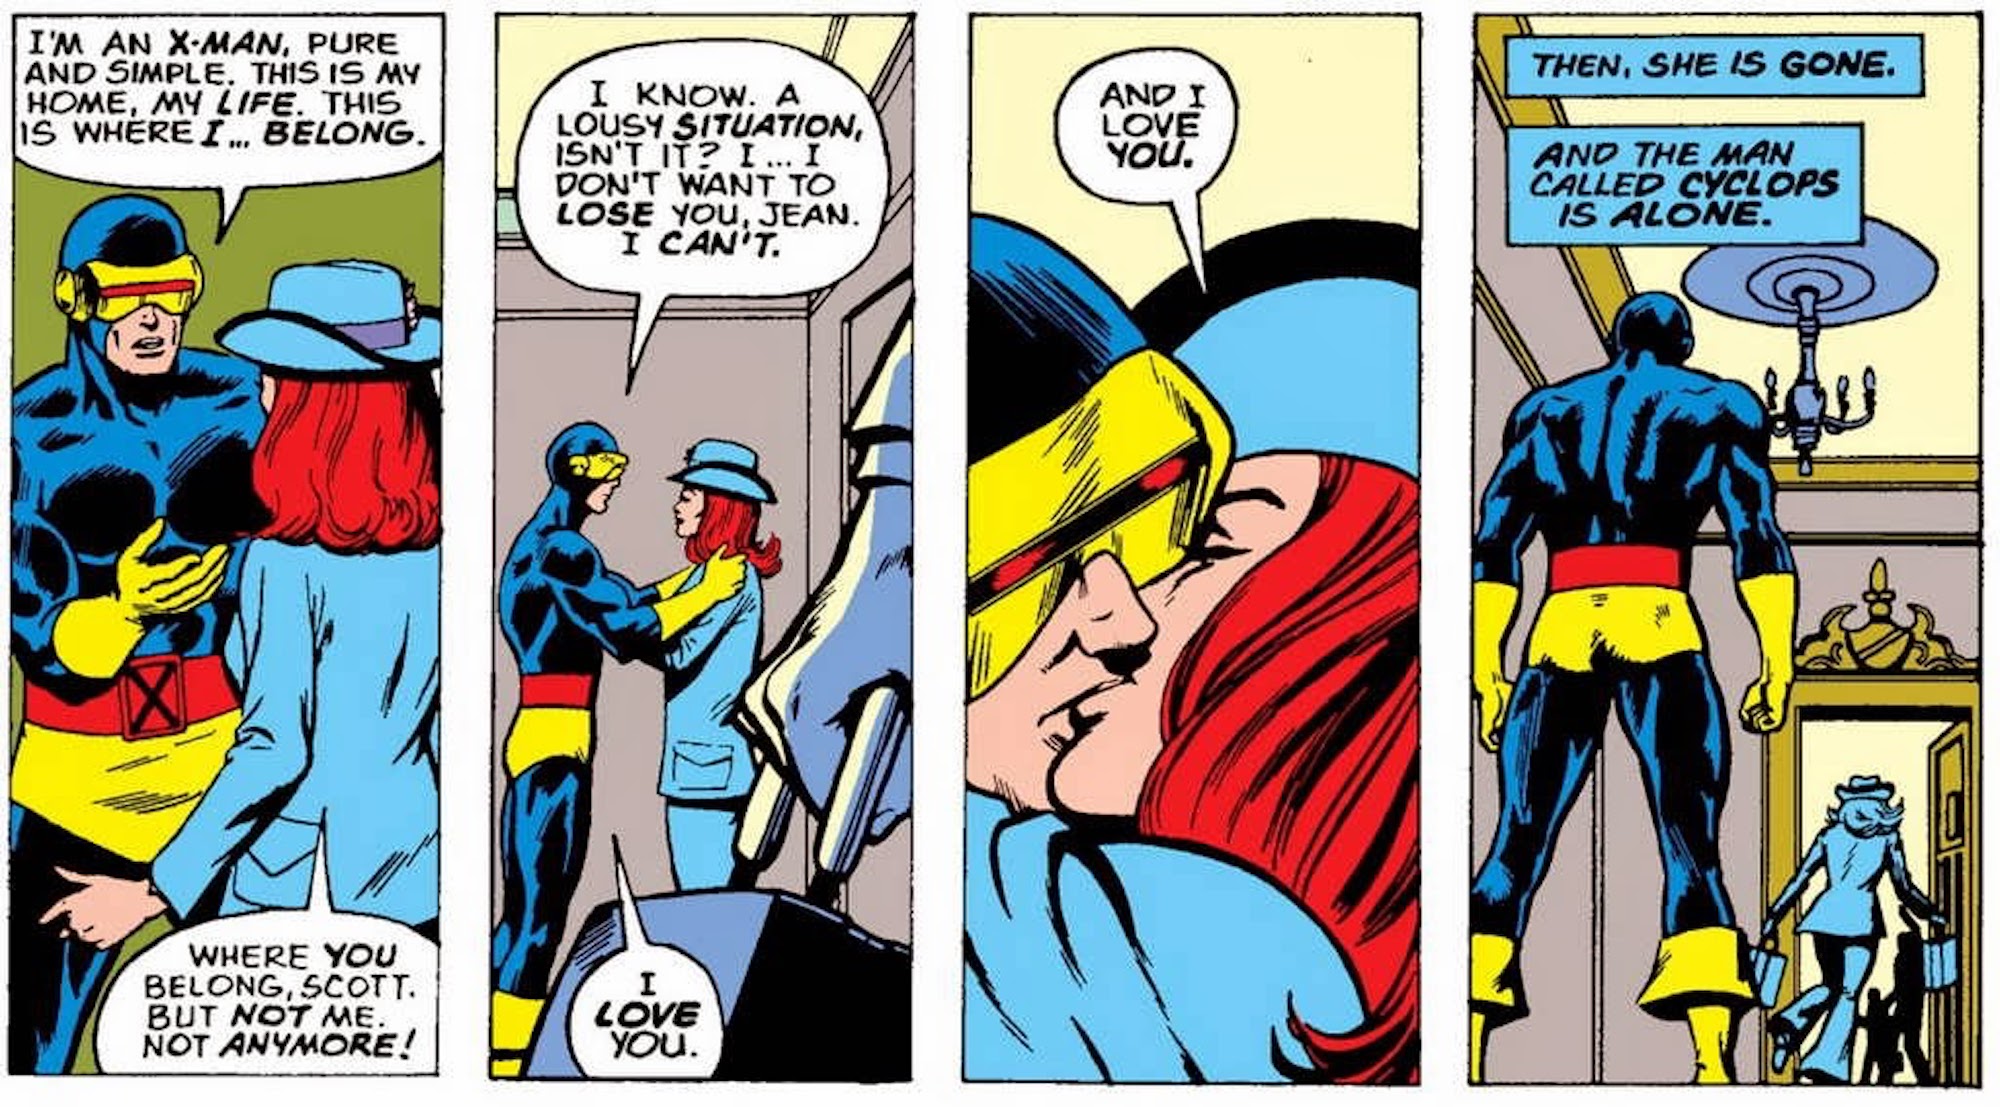 This image shows a comic strip from X-Men #94 (1975), where Phoenix kissed Cyclops before she left to venture off in the real world. 